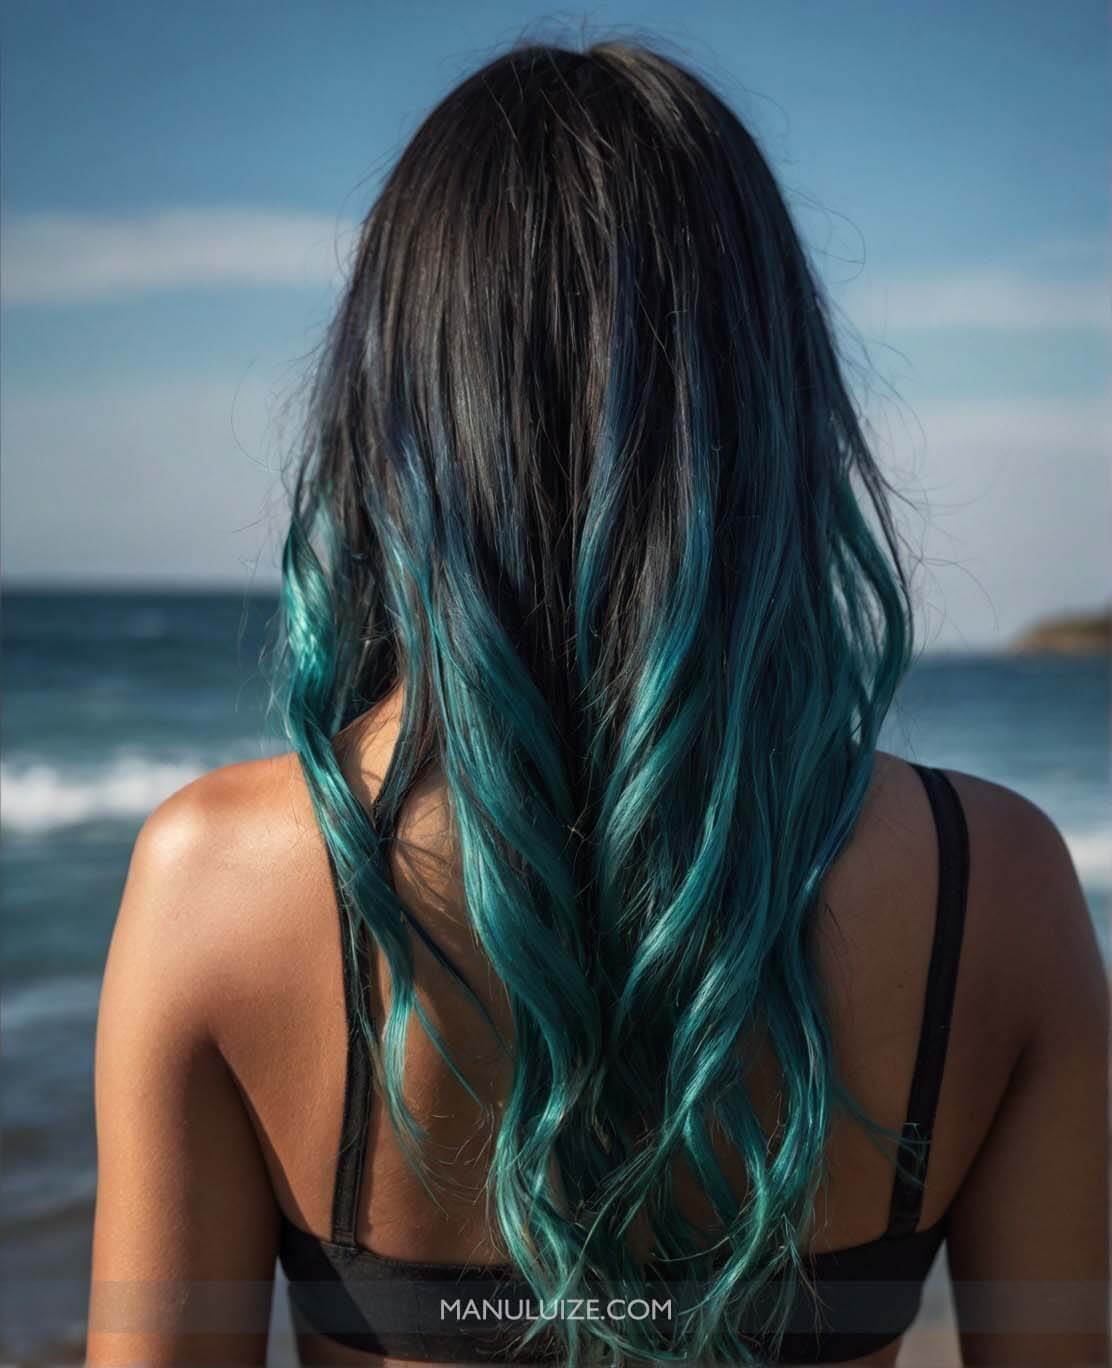 Black hair with blue ends